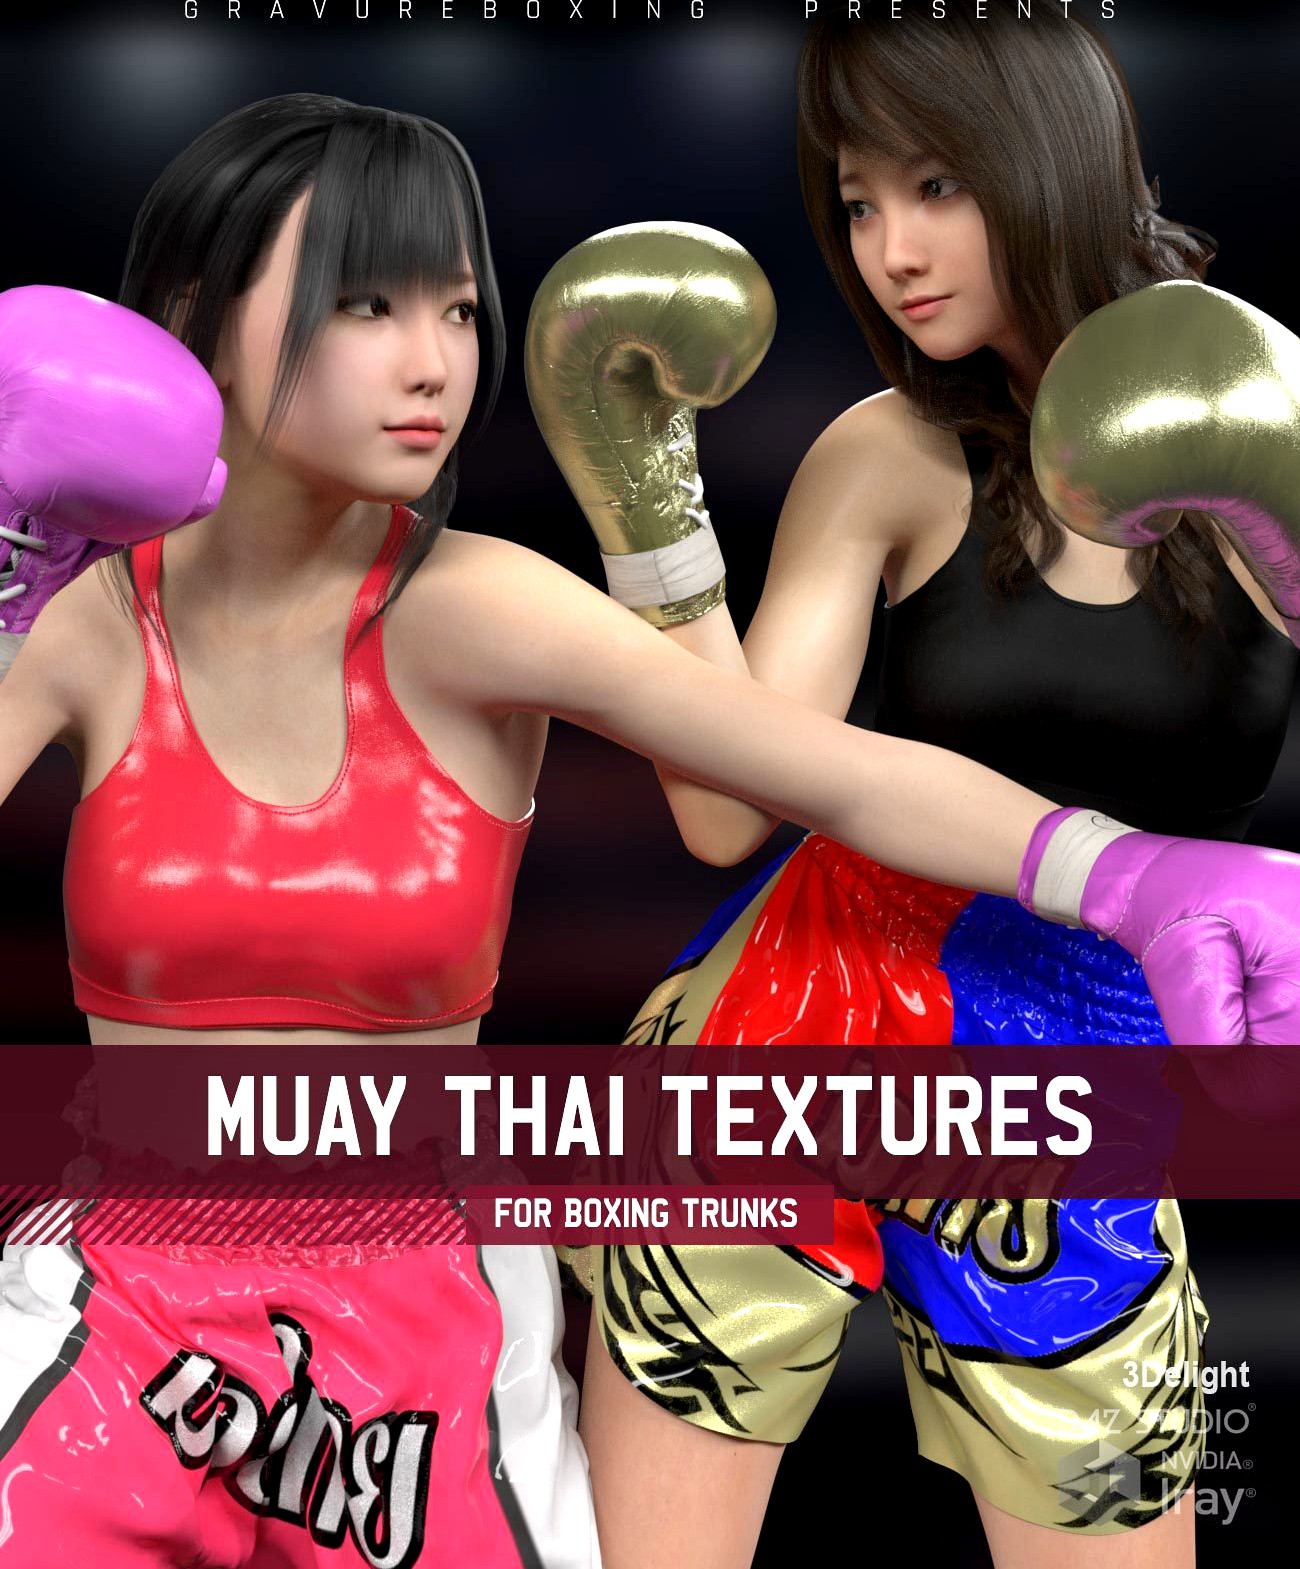 Muay Thai Textures for Boxing Trunks